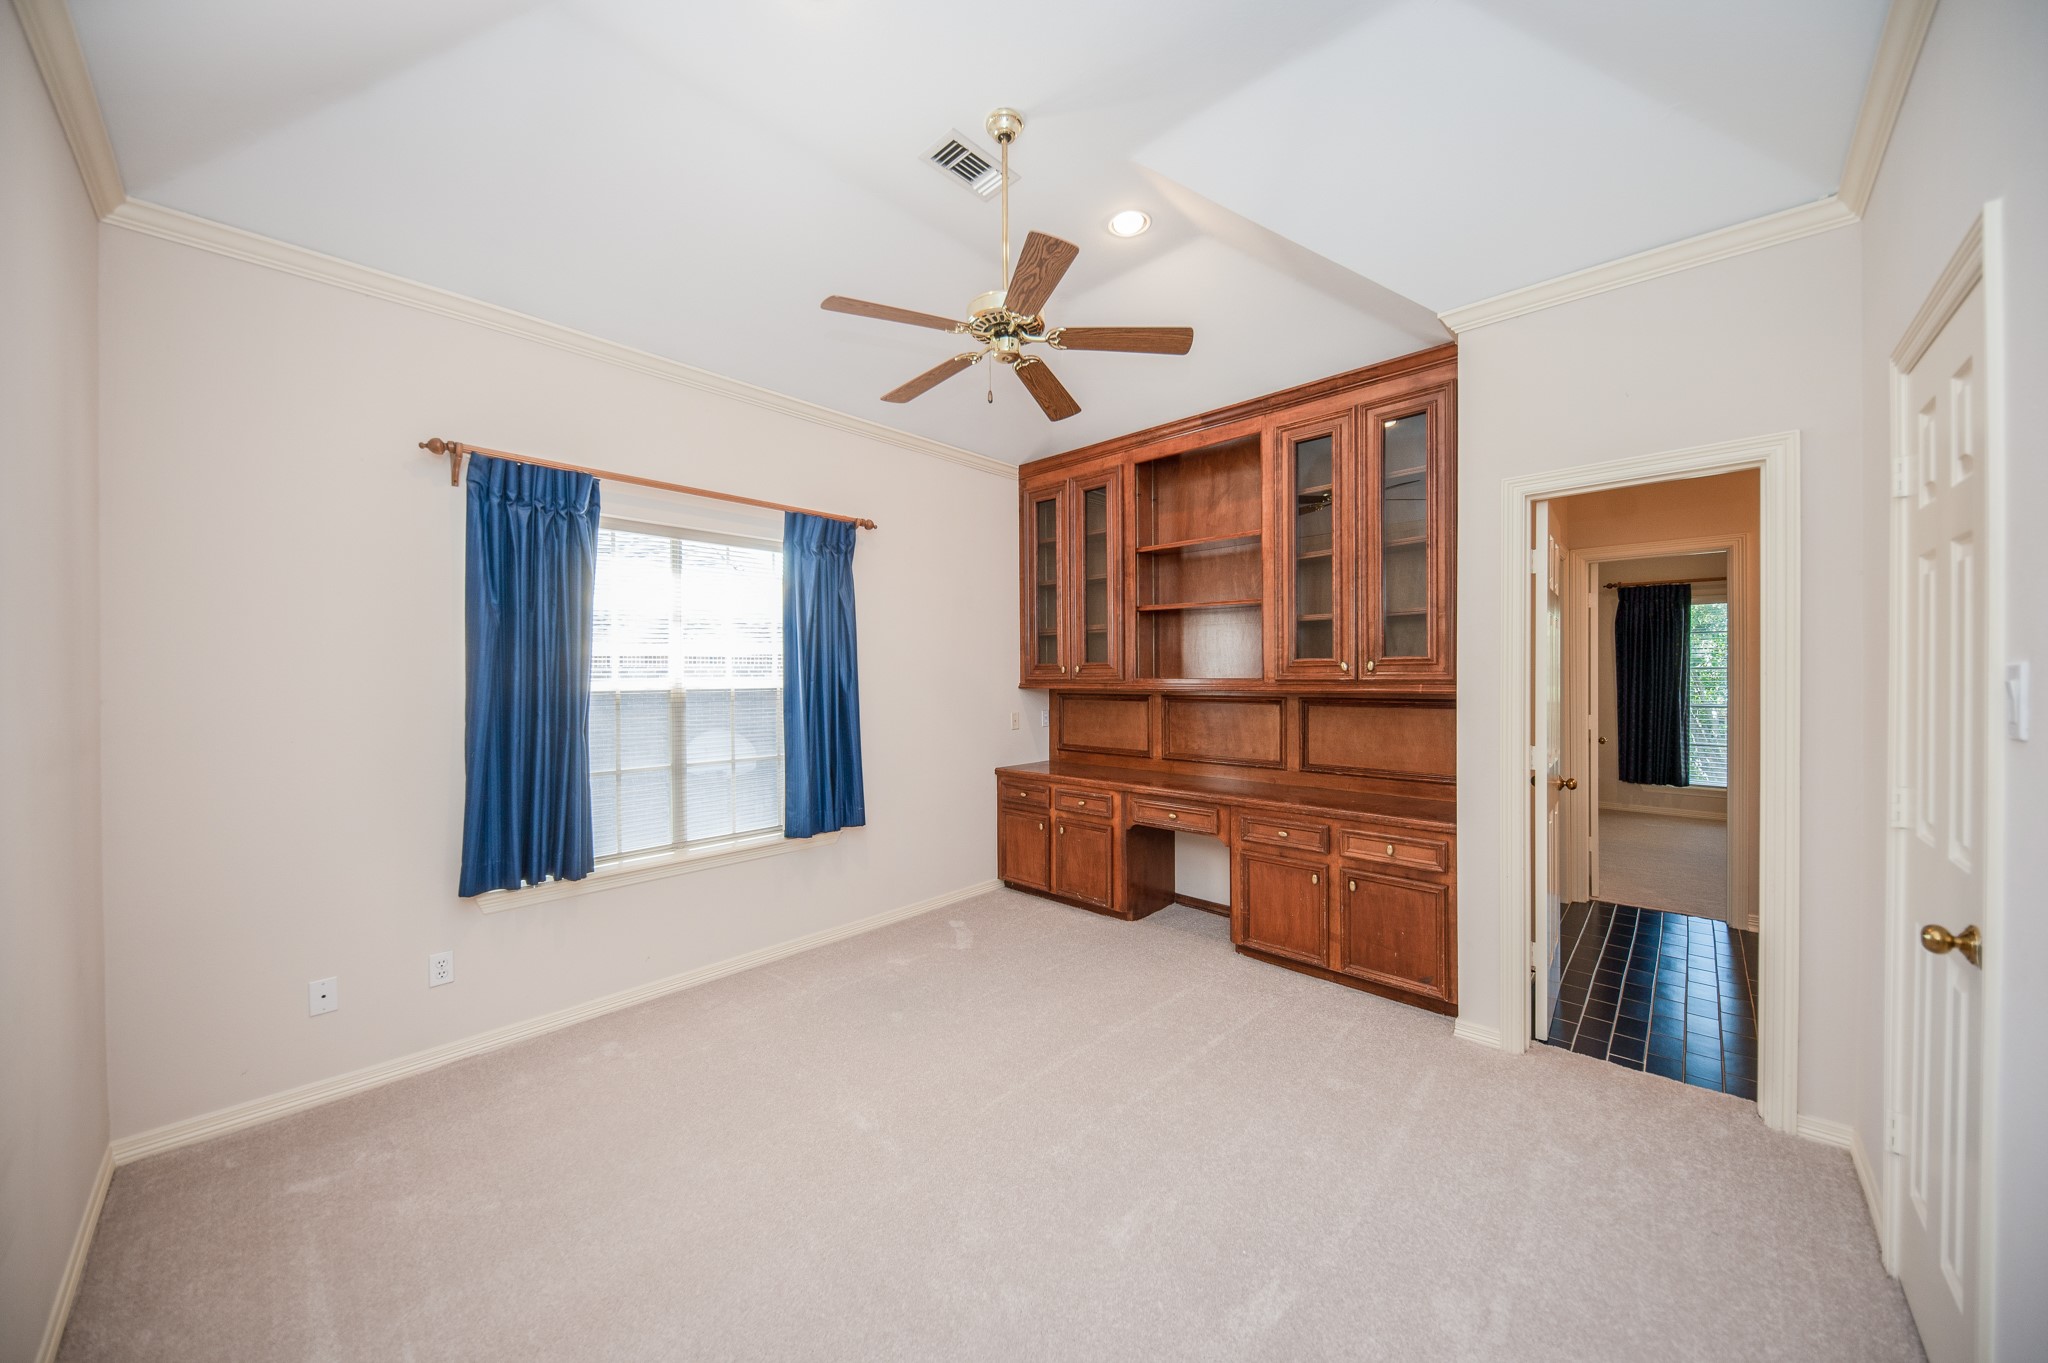 Nice size bedroom with custom made cabinetry with adjoining large bathroom.